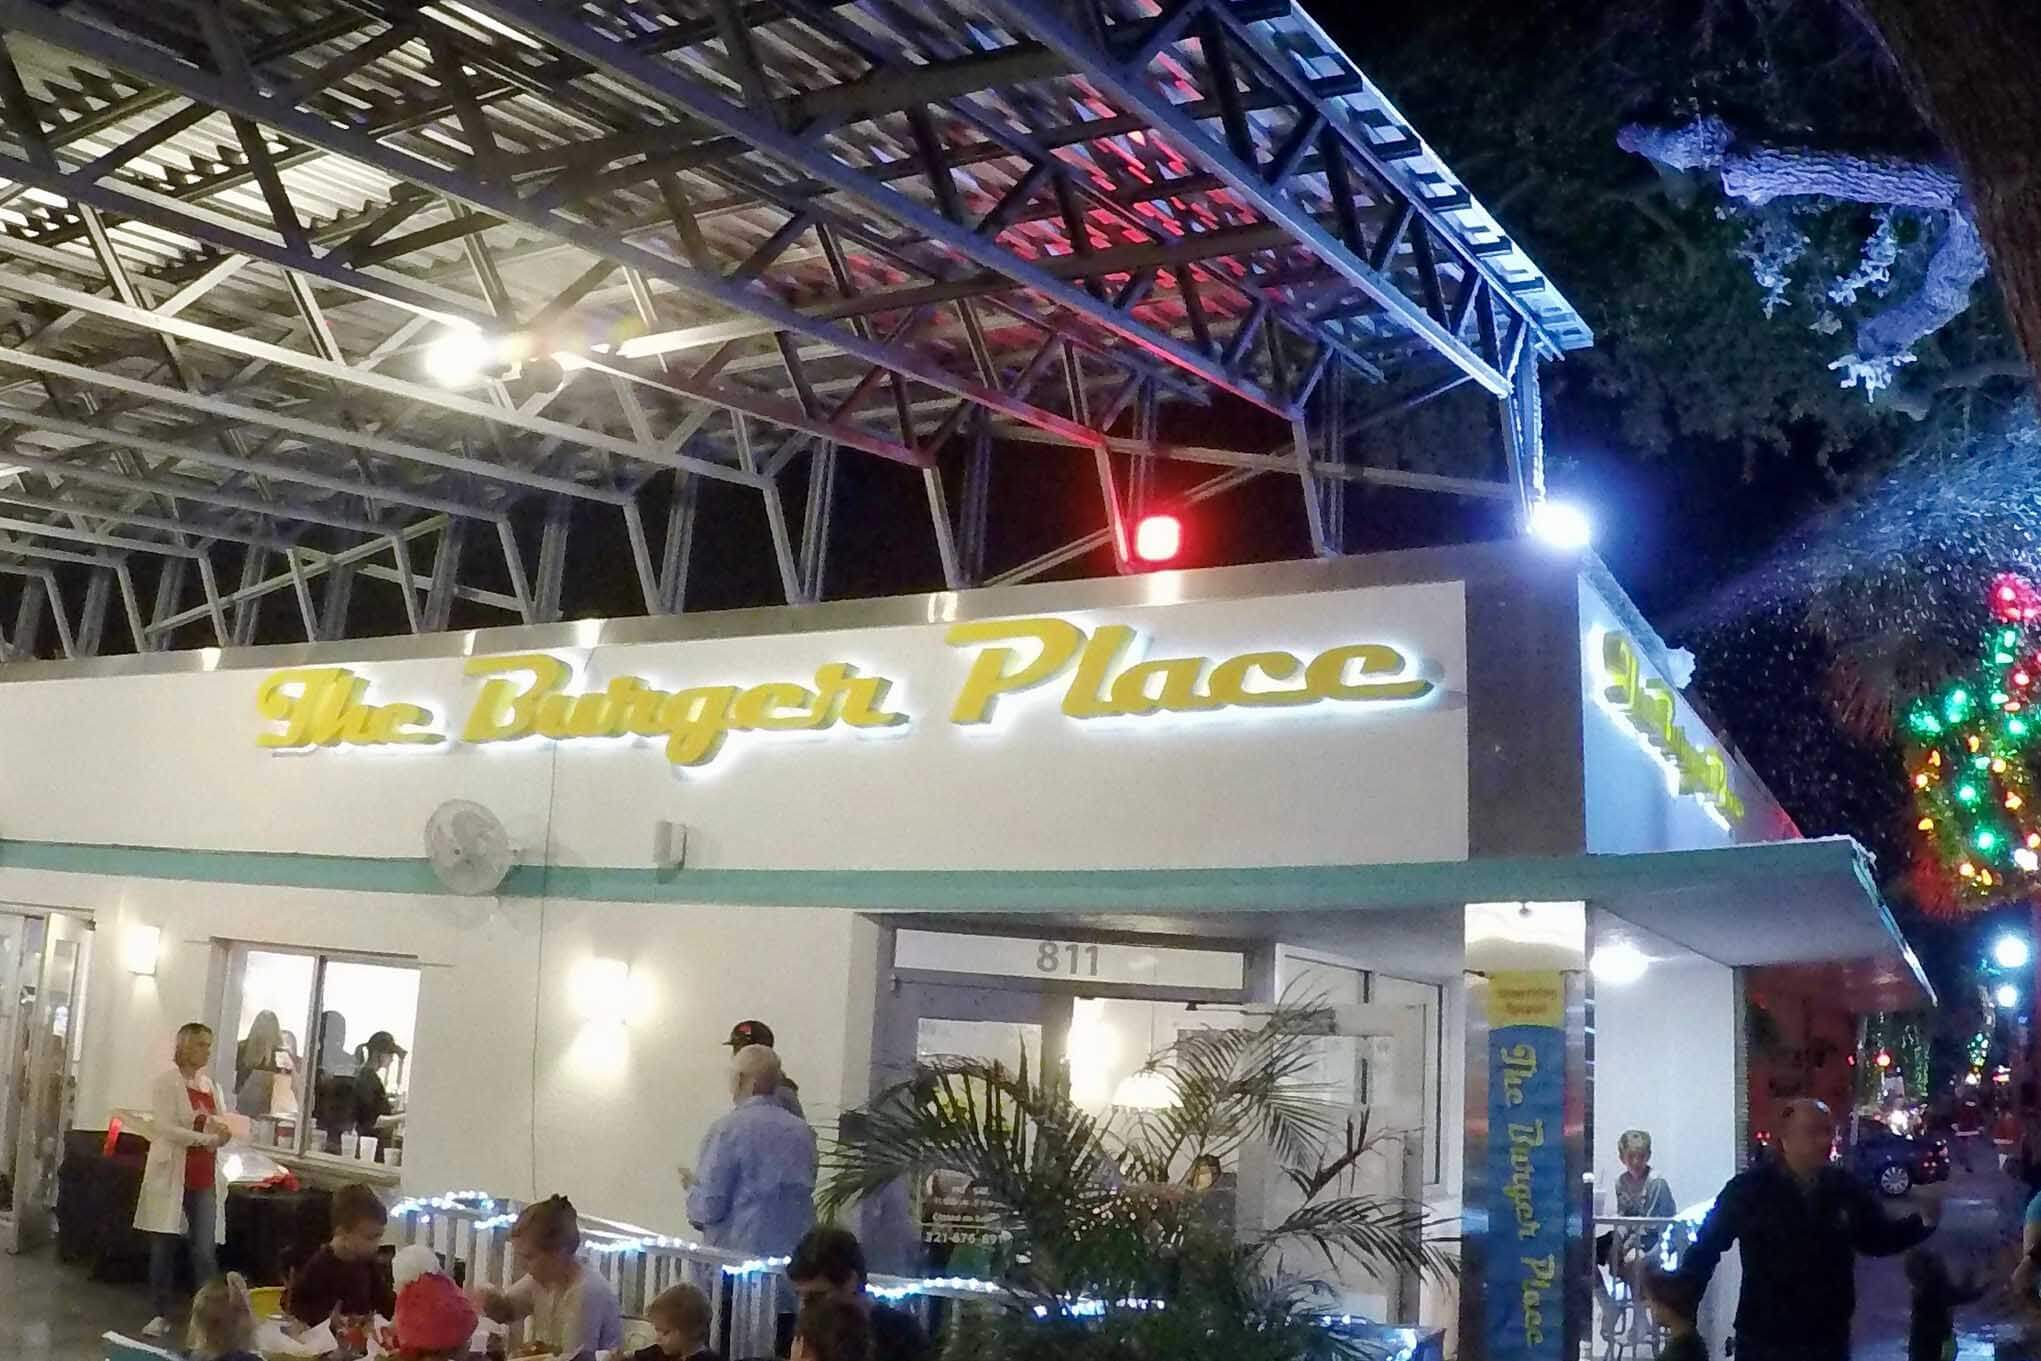 Exterior of The Burger Place. 